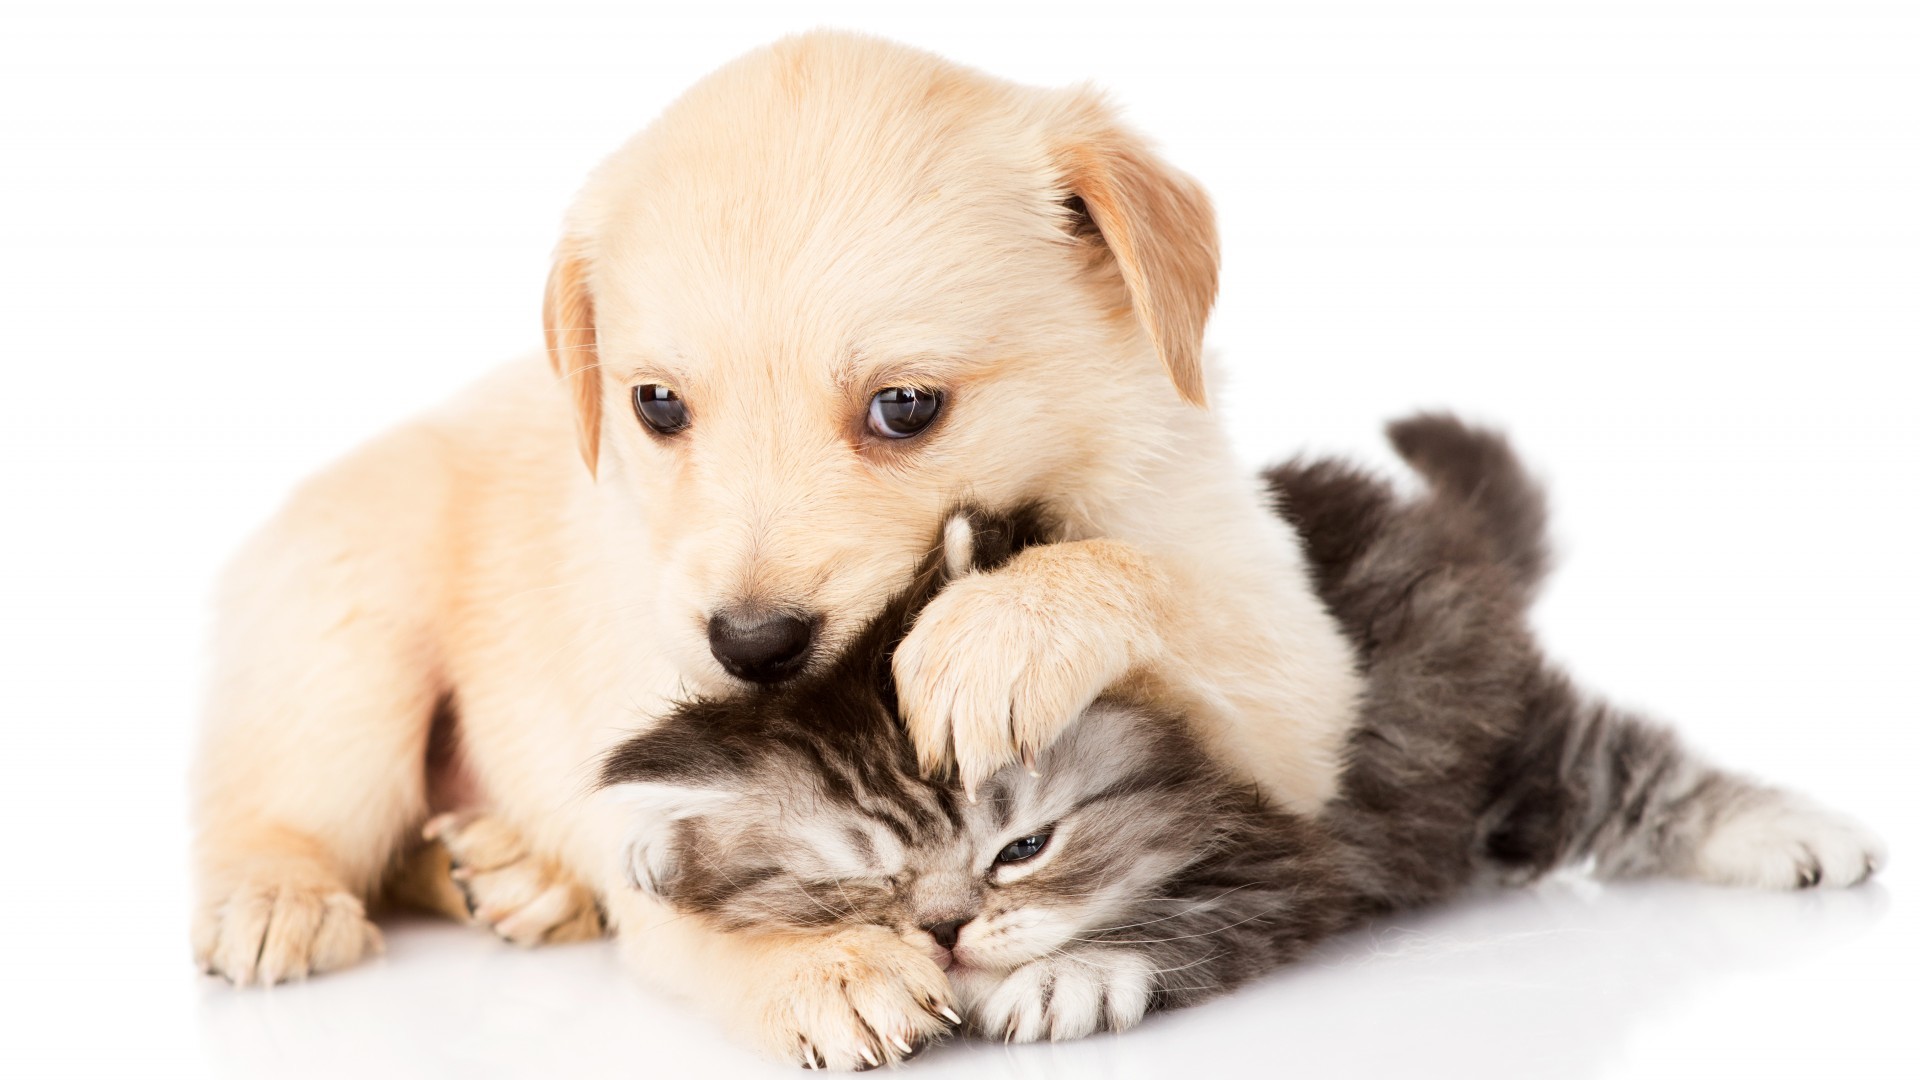 Cute Puppy And Kitten Wallpaper Image